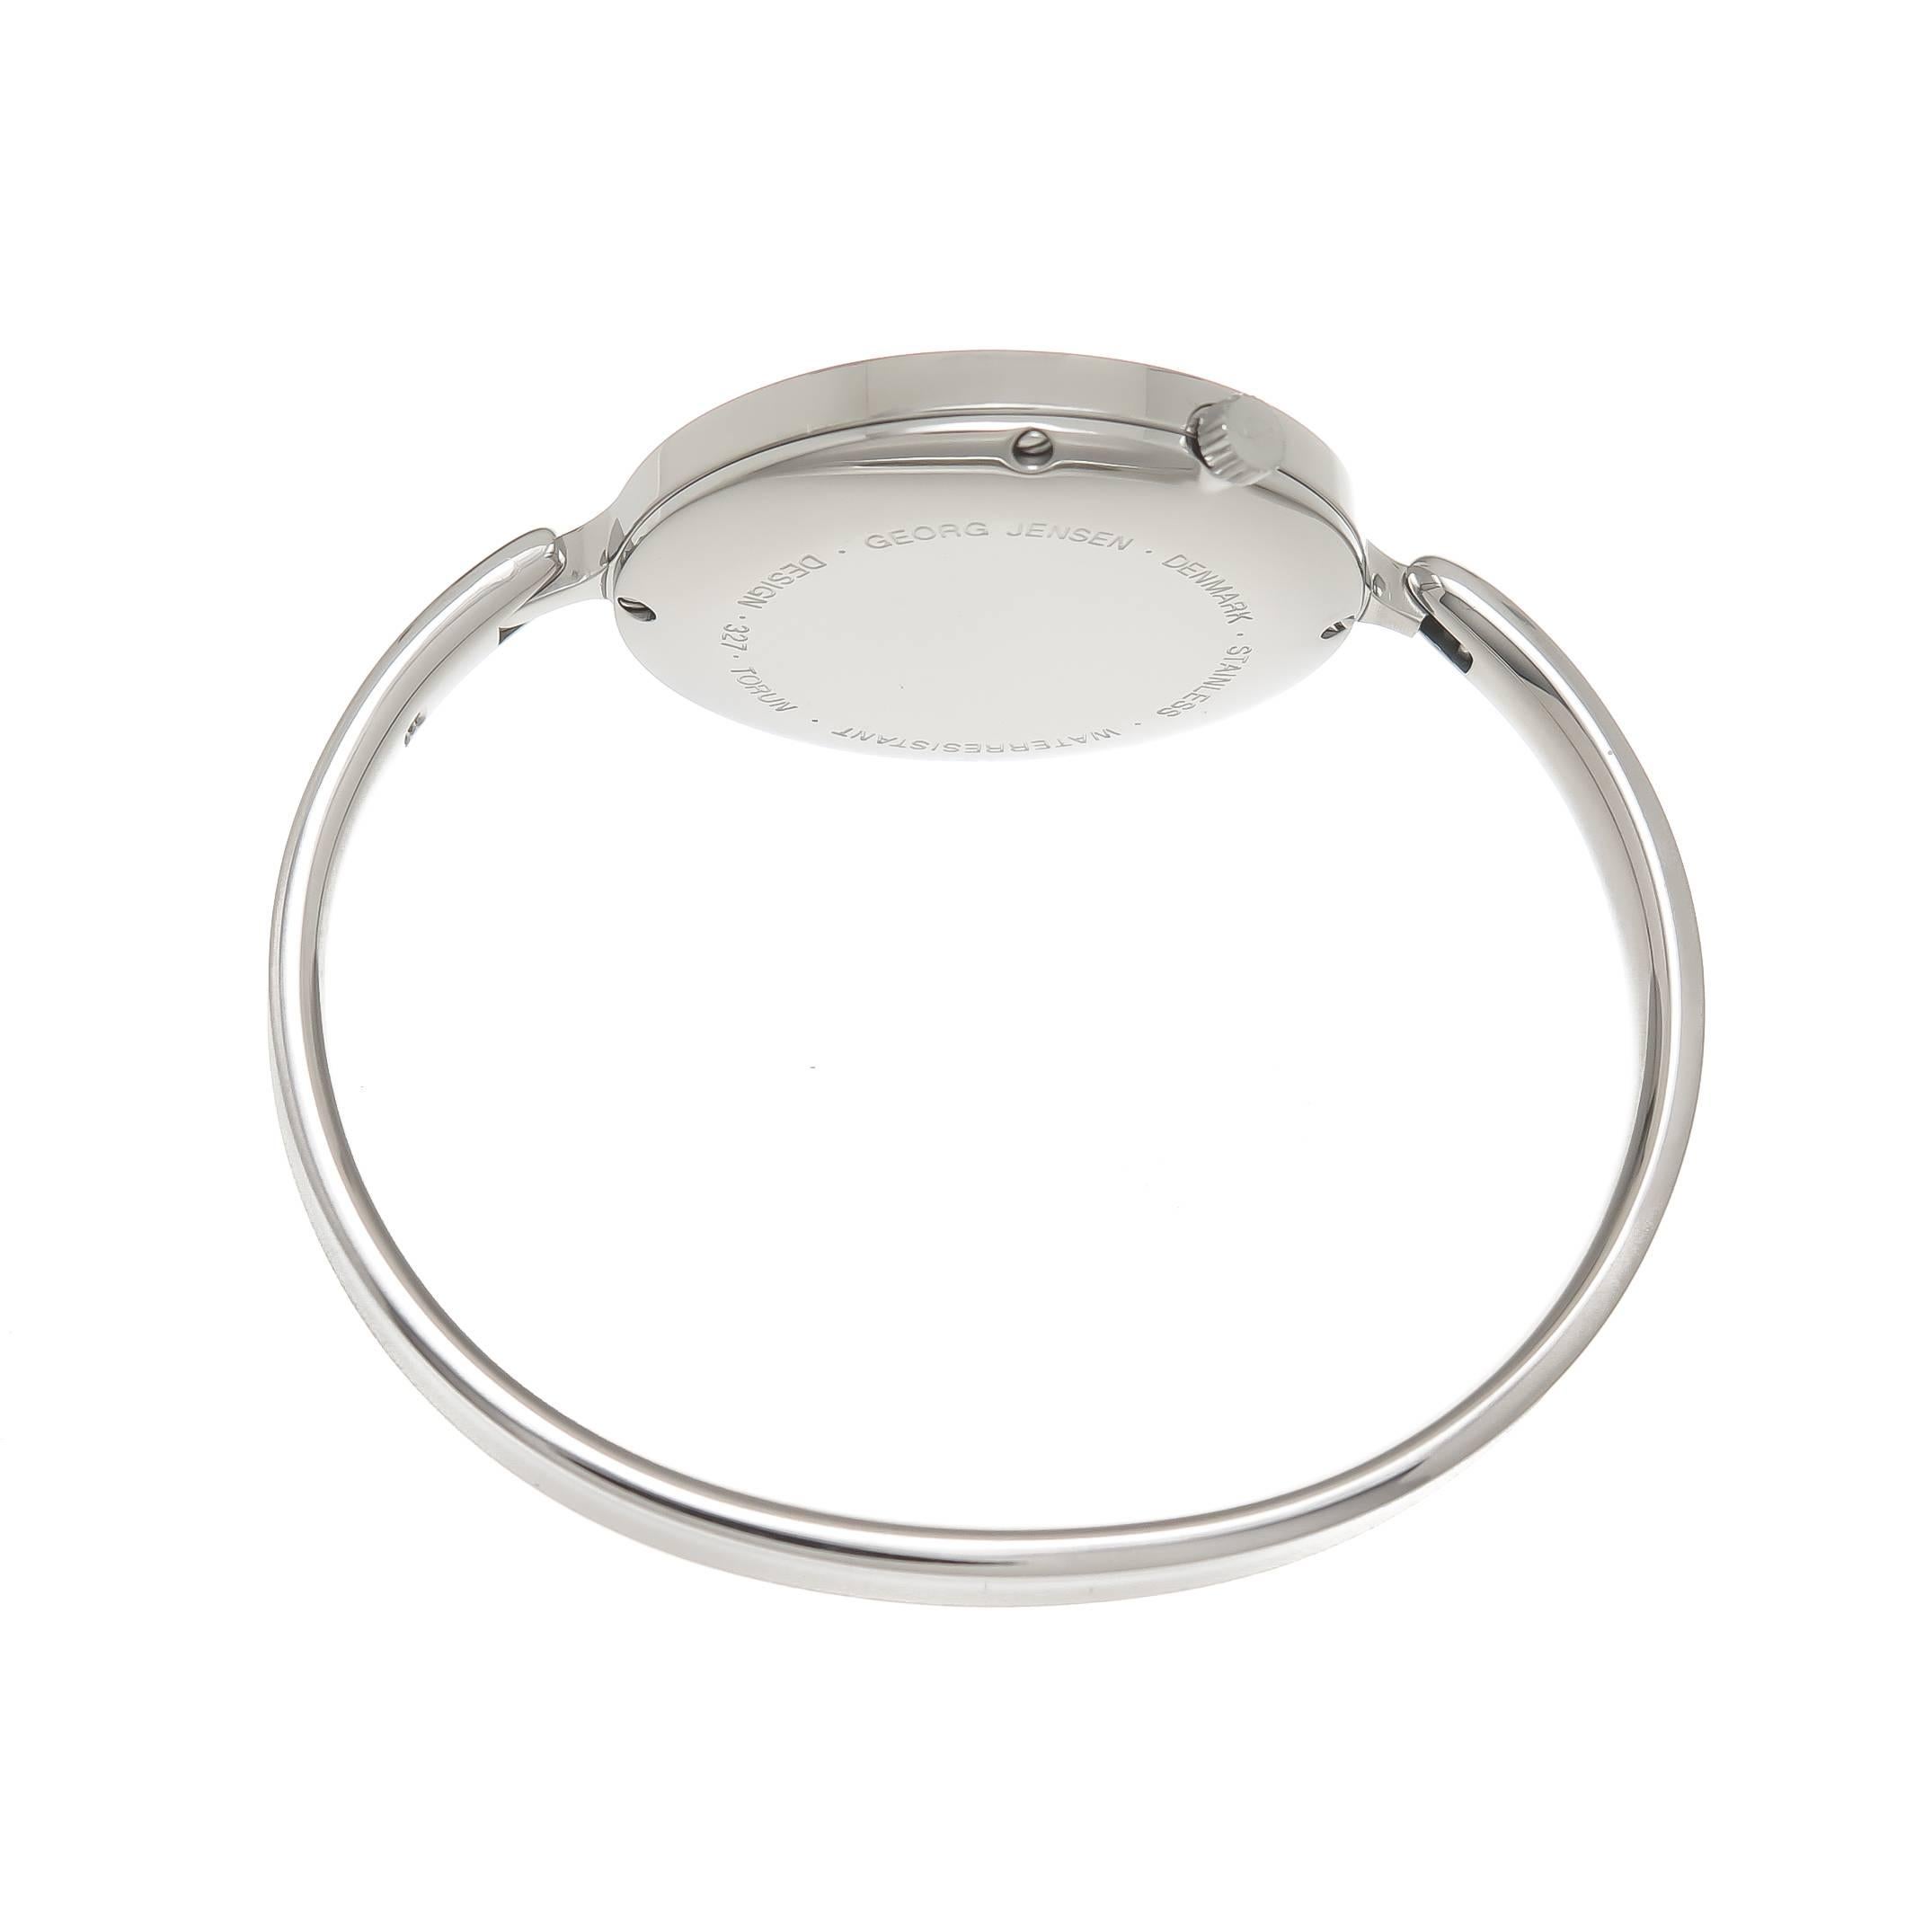 Circa 1990 Georg Jensen Vivianna Bangle Watch By Torun. 1 1/4 inch Diameter watch attached to a 3/16 inch wide bangle bracelet with a 6 inch inside measurement. Quartz Movement, silver mirrored Dial. Recently serviced and comes with a one year N.